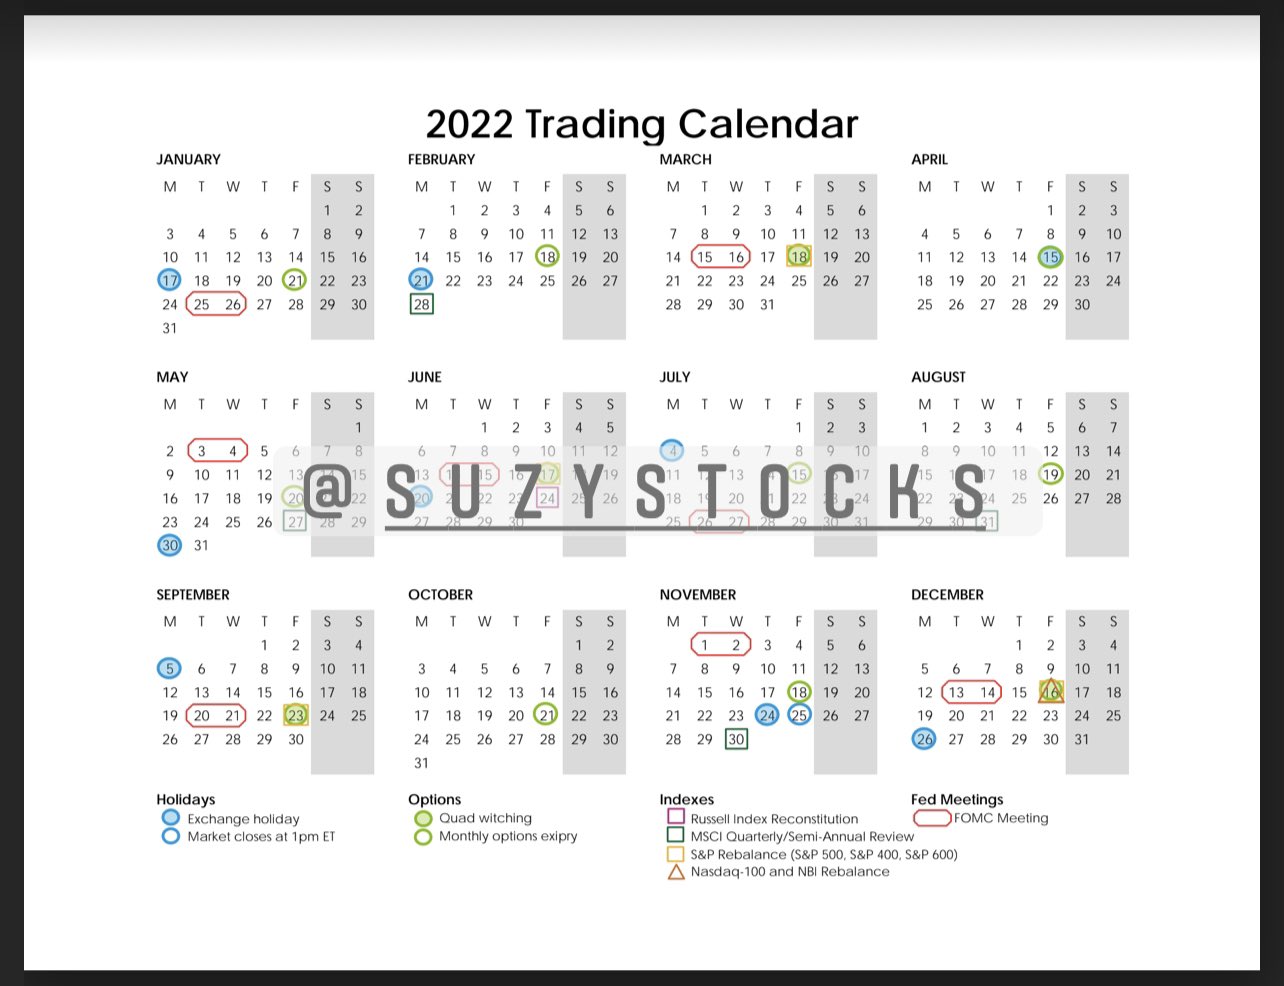 Trading Calendar 2022 Suzy On Twitter: "Trading Calendar Updated For 2022. Has Market Holidays,  Option Expirations, Index Rebalancing, Fomc Meetings. Download It, Save It,  Share It, Print It, Post It. Clean Version -> Https://T.co/Ft31Zievzs  Https://T.co/I0L4Wsnjy5" /